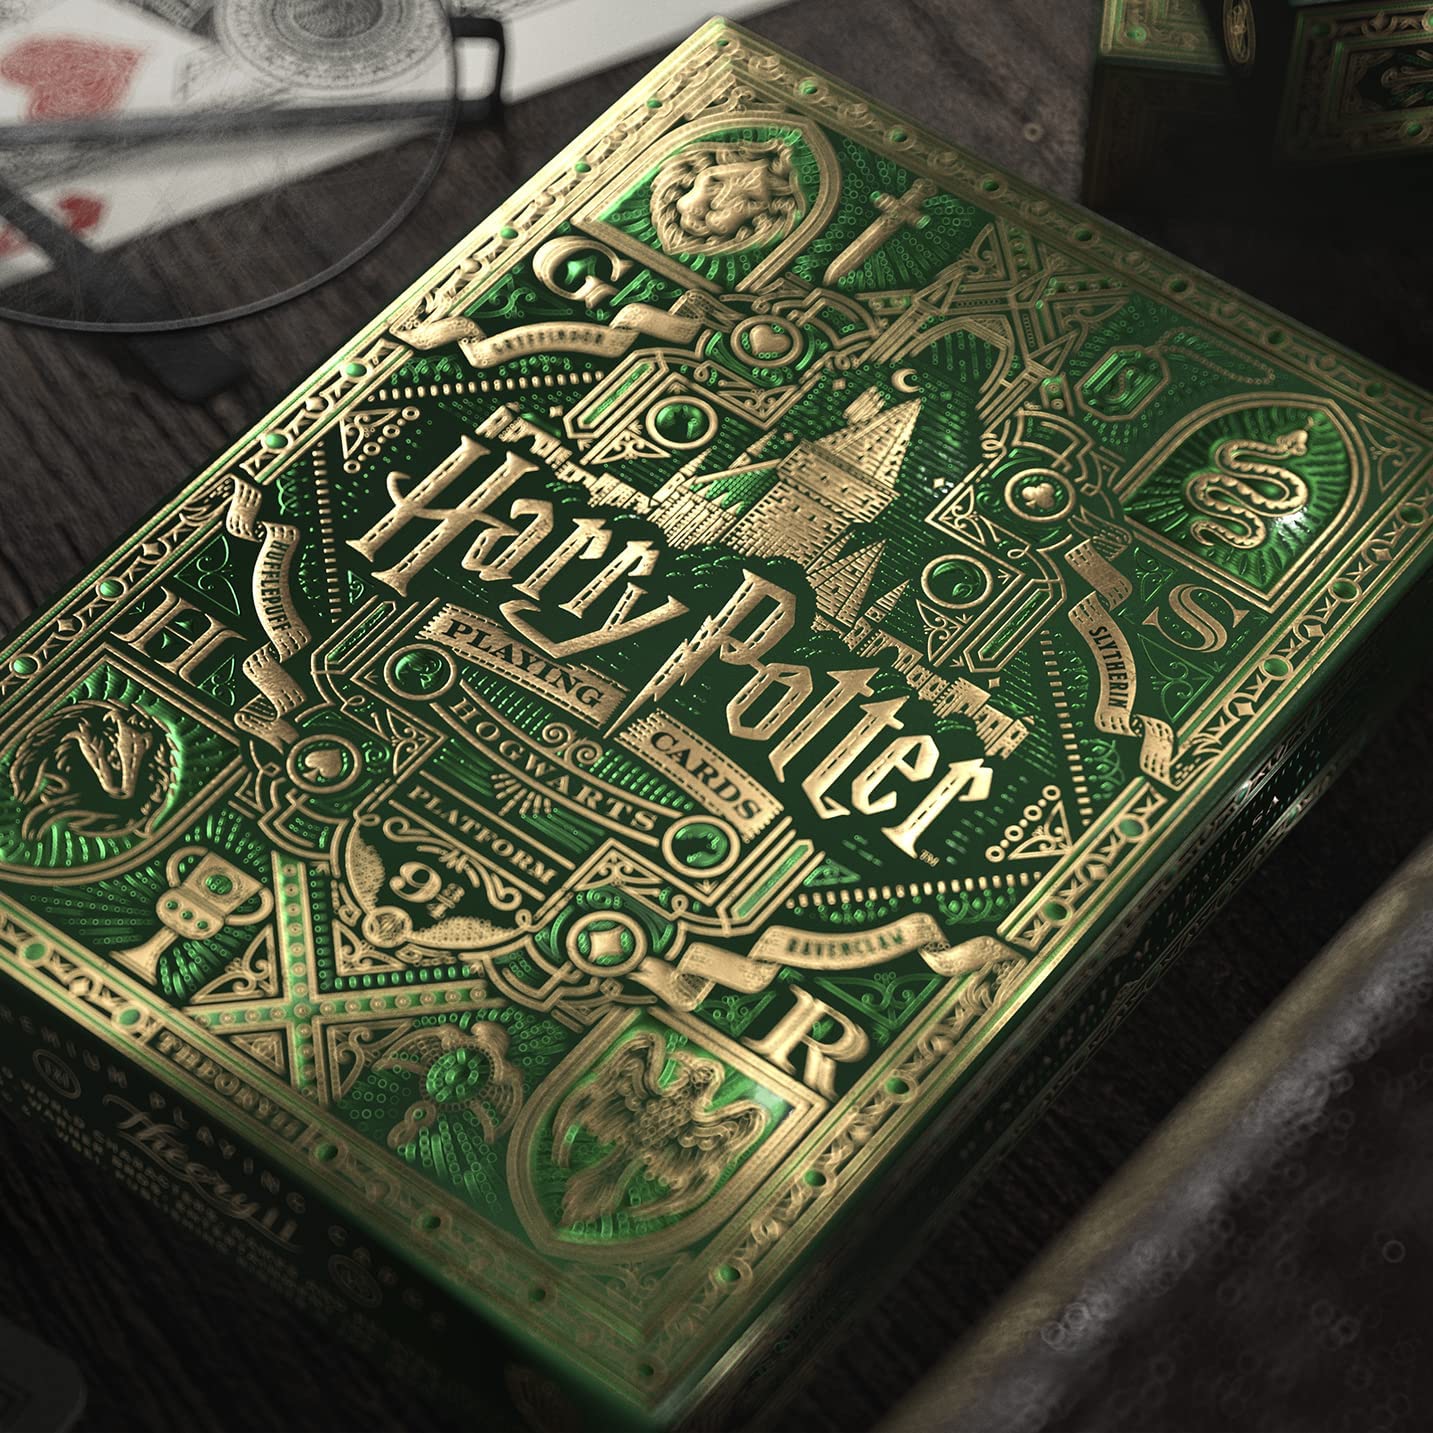 Slytherin playing cards